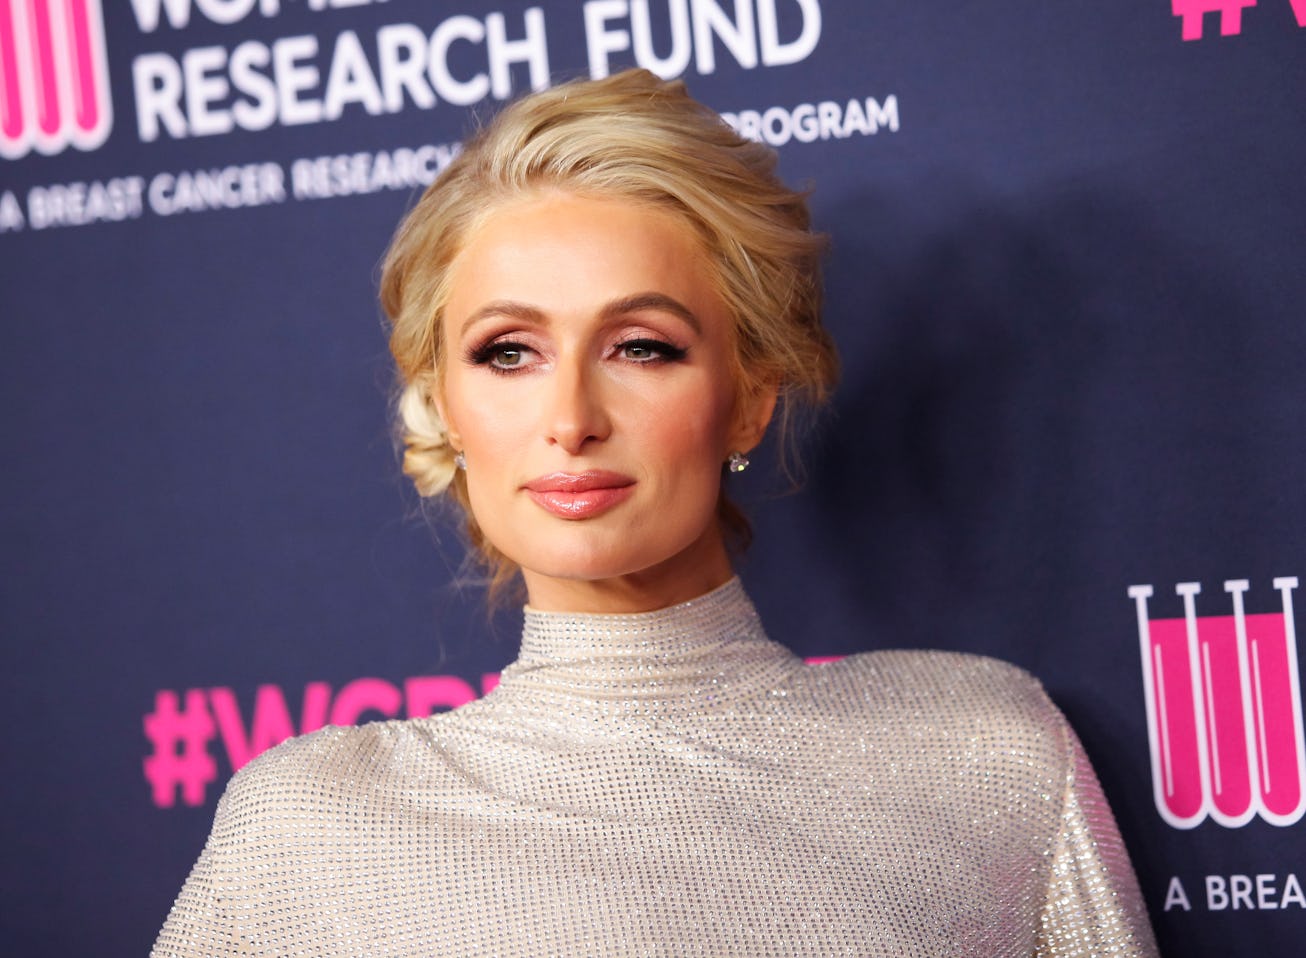 Paris Hilton opened up about a recently resurfaced 2007 David Letterman interview that she called "c...